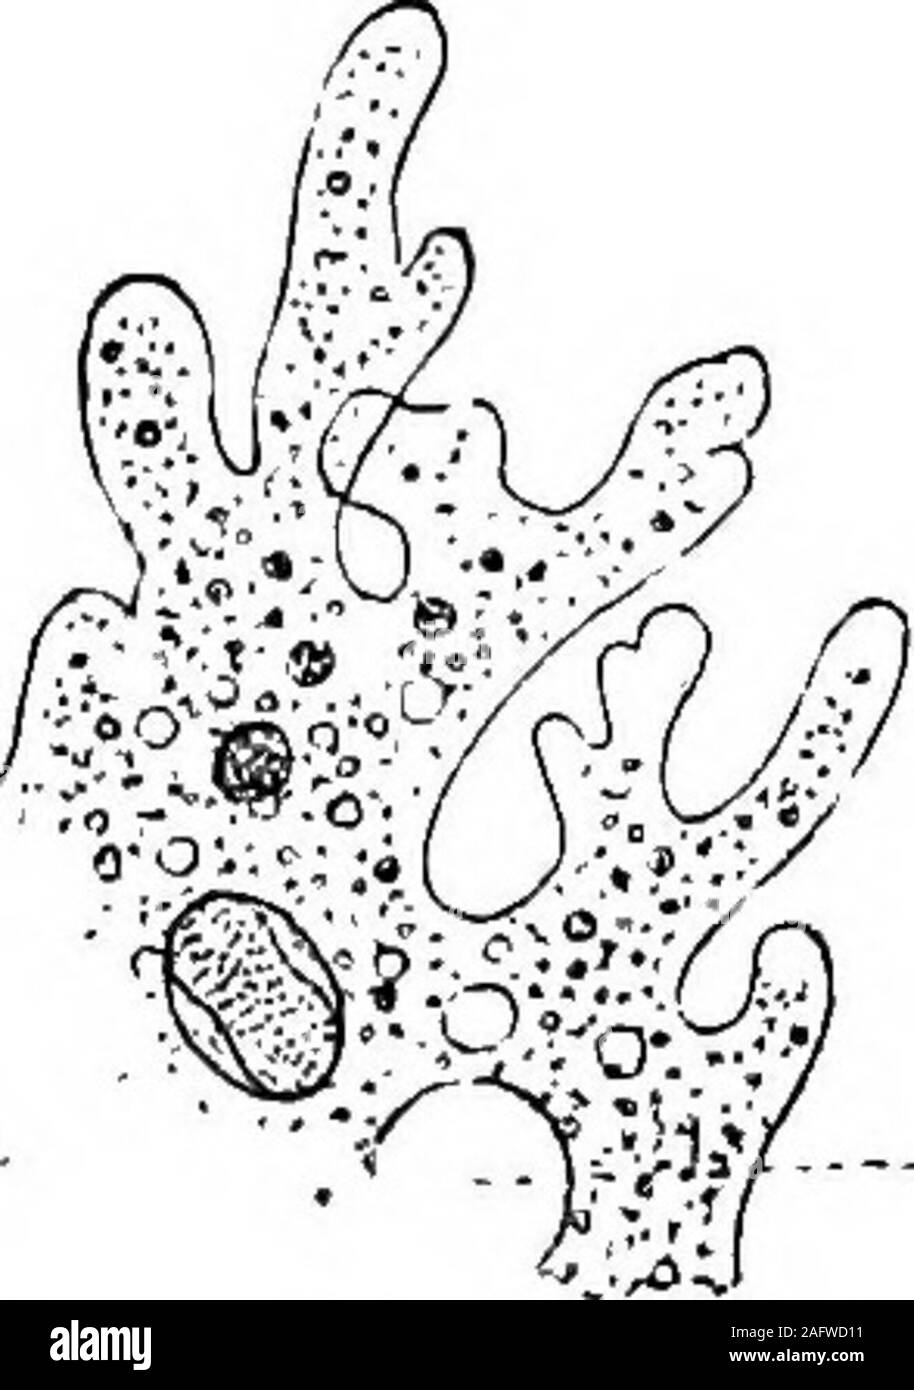 . The British freshwater Rhizopoda and Heliozoa. digestion,or whatever else, in the life of the unicellular organism,is expressed by constant chemical interchange betweenthe cytoplasm and the nucleus. Means oy Locomotion. Except in a small number of species, the Rhizopodaare endowed with the power of locomotion through * Op. cit., p. 278. 10 BRITISH FRBSHWATEB EHIZOPODA. the agency of pseudopodia. In the Amoebina, ArceUida,and other lobose forms, these changeable processes are usually few in number, short, digitate, and bluntat the tip; or they may be broad and lobose—in theAmo-hie they are mo Stock Photo